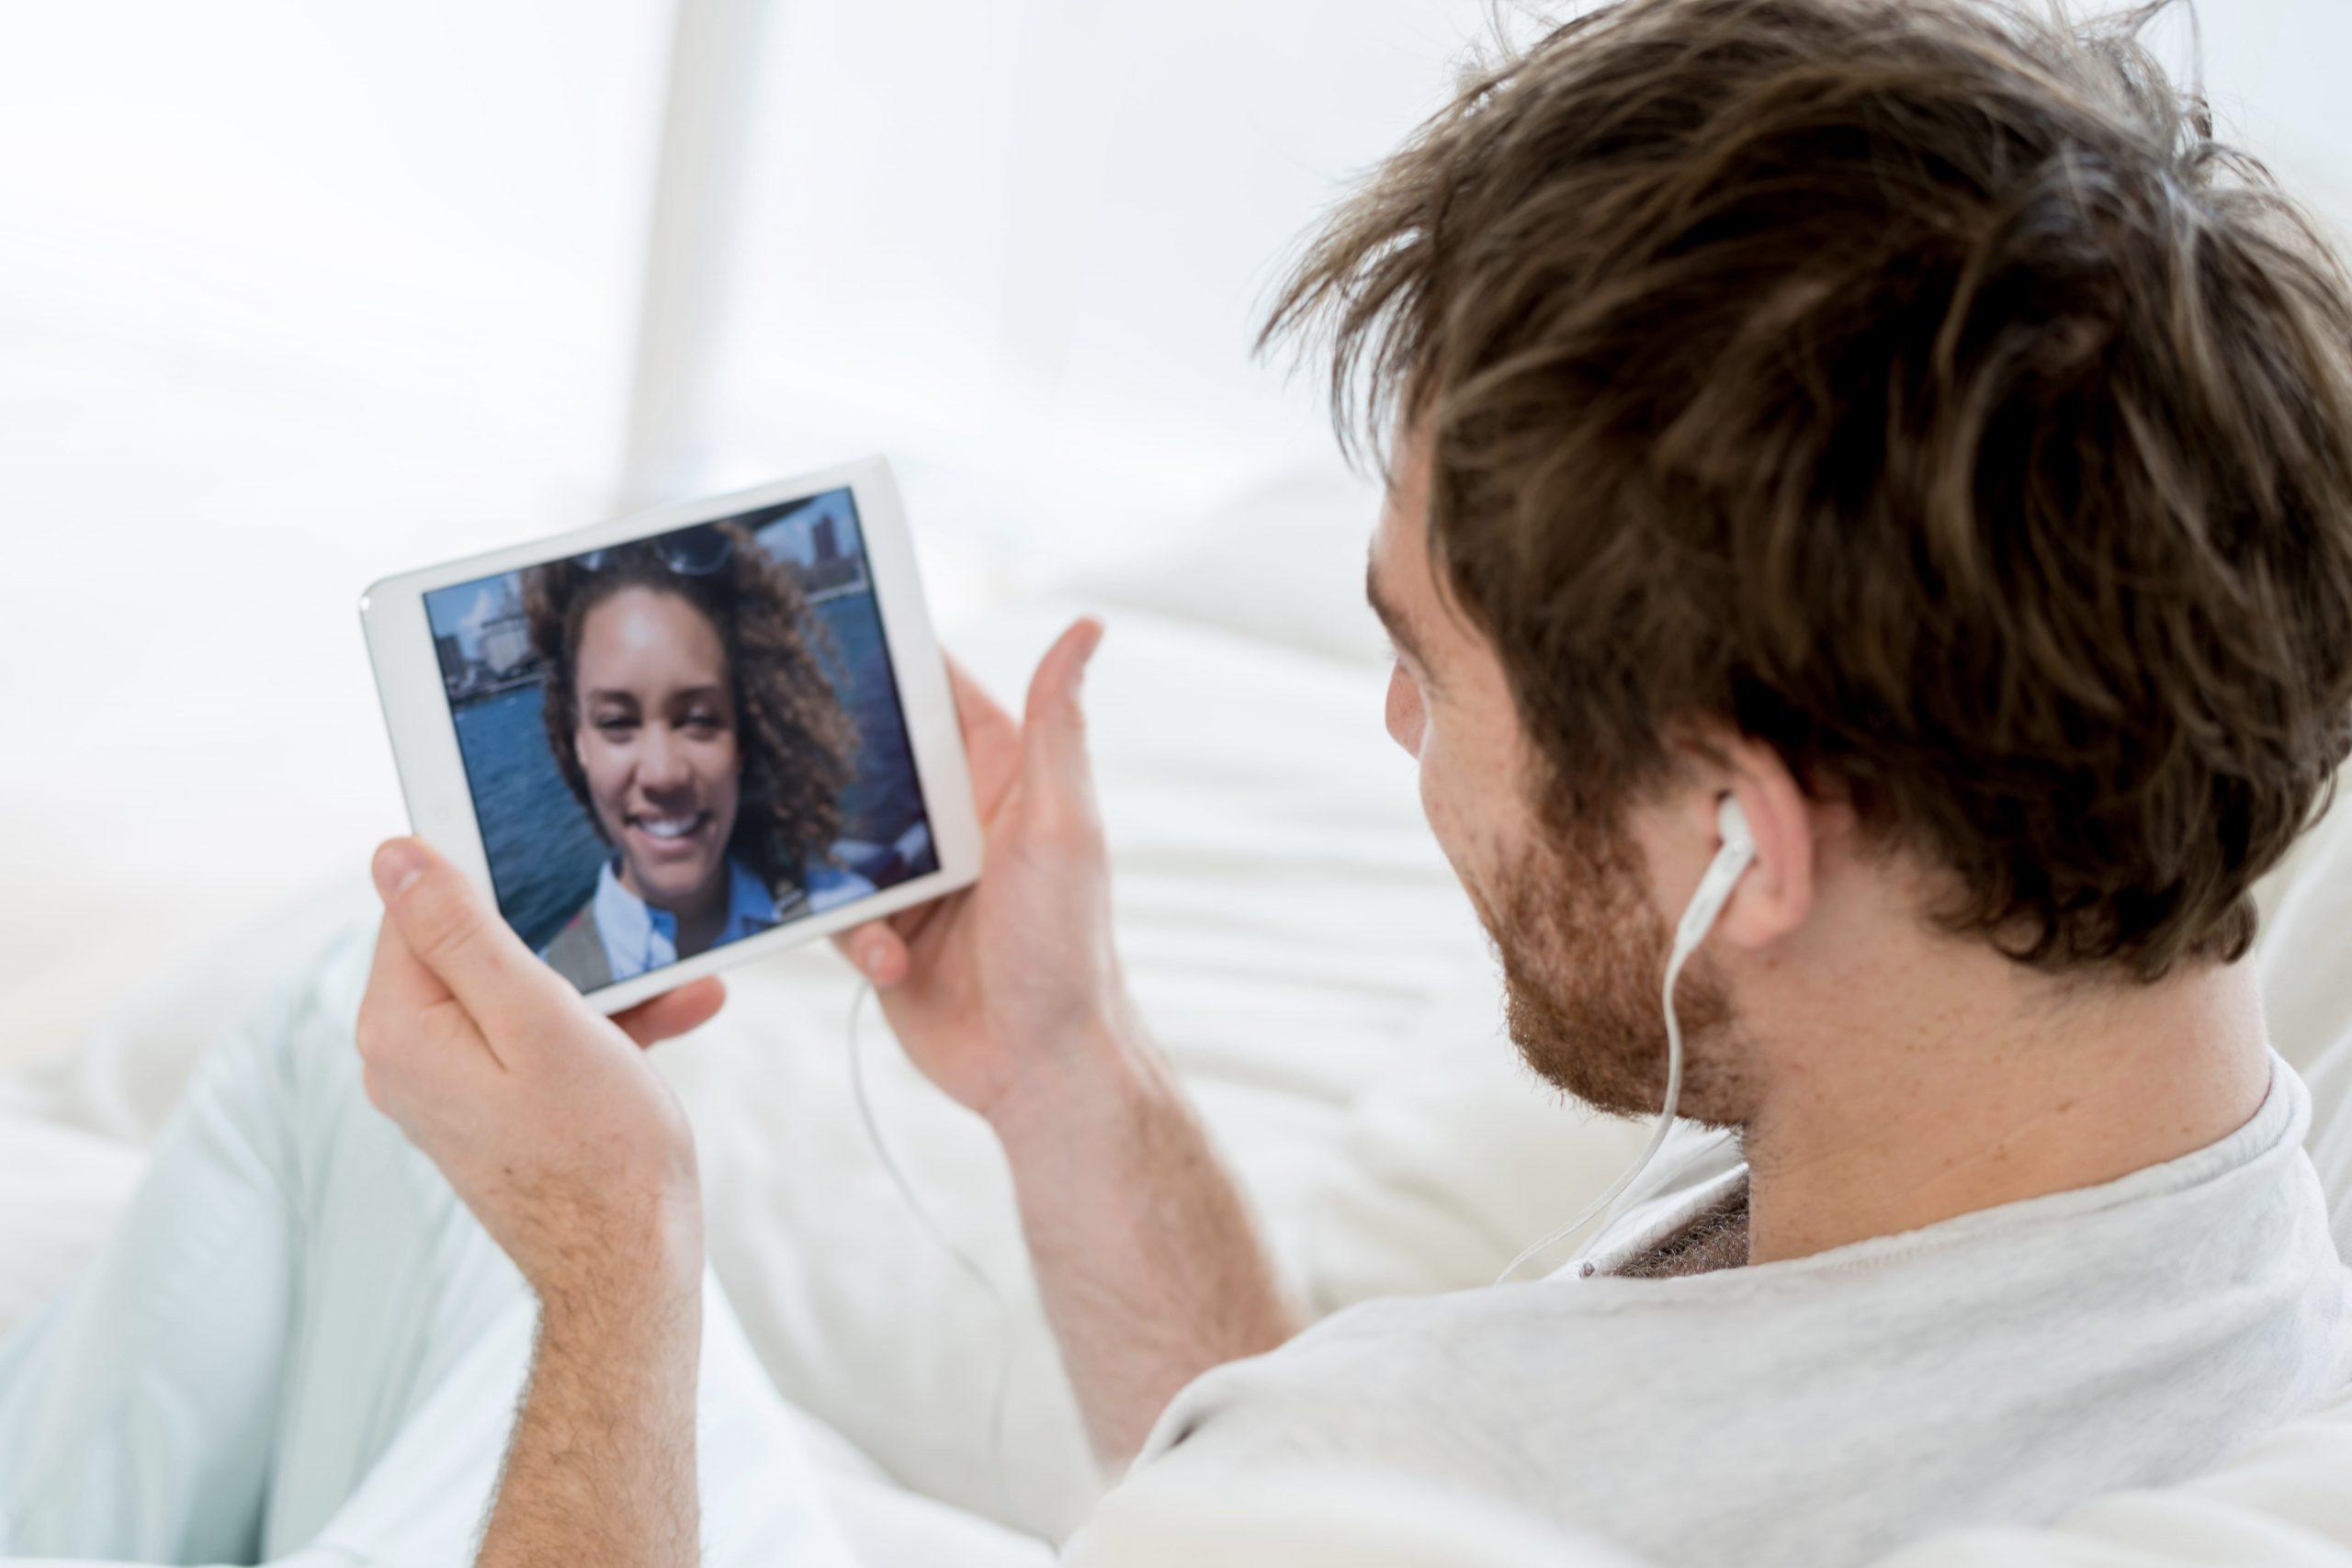 Long-Distance Dating With No Meetup in Sight? Here’s Some Great Advice